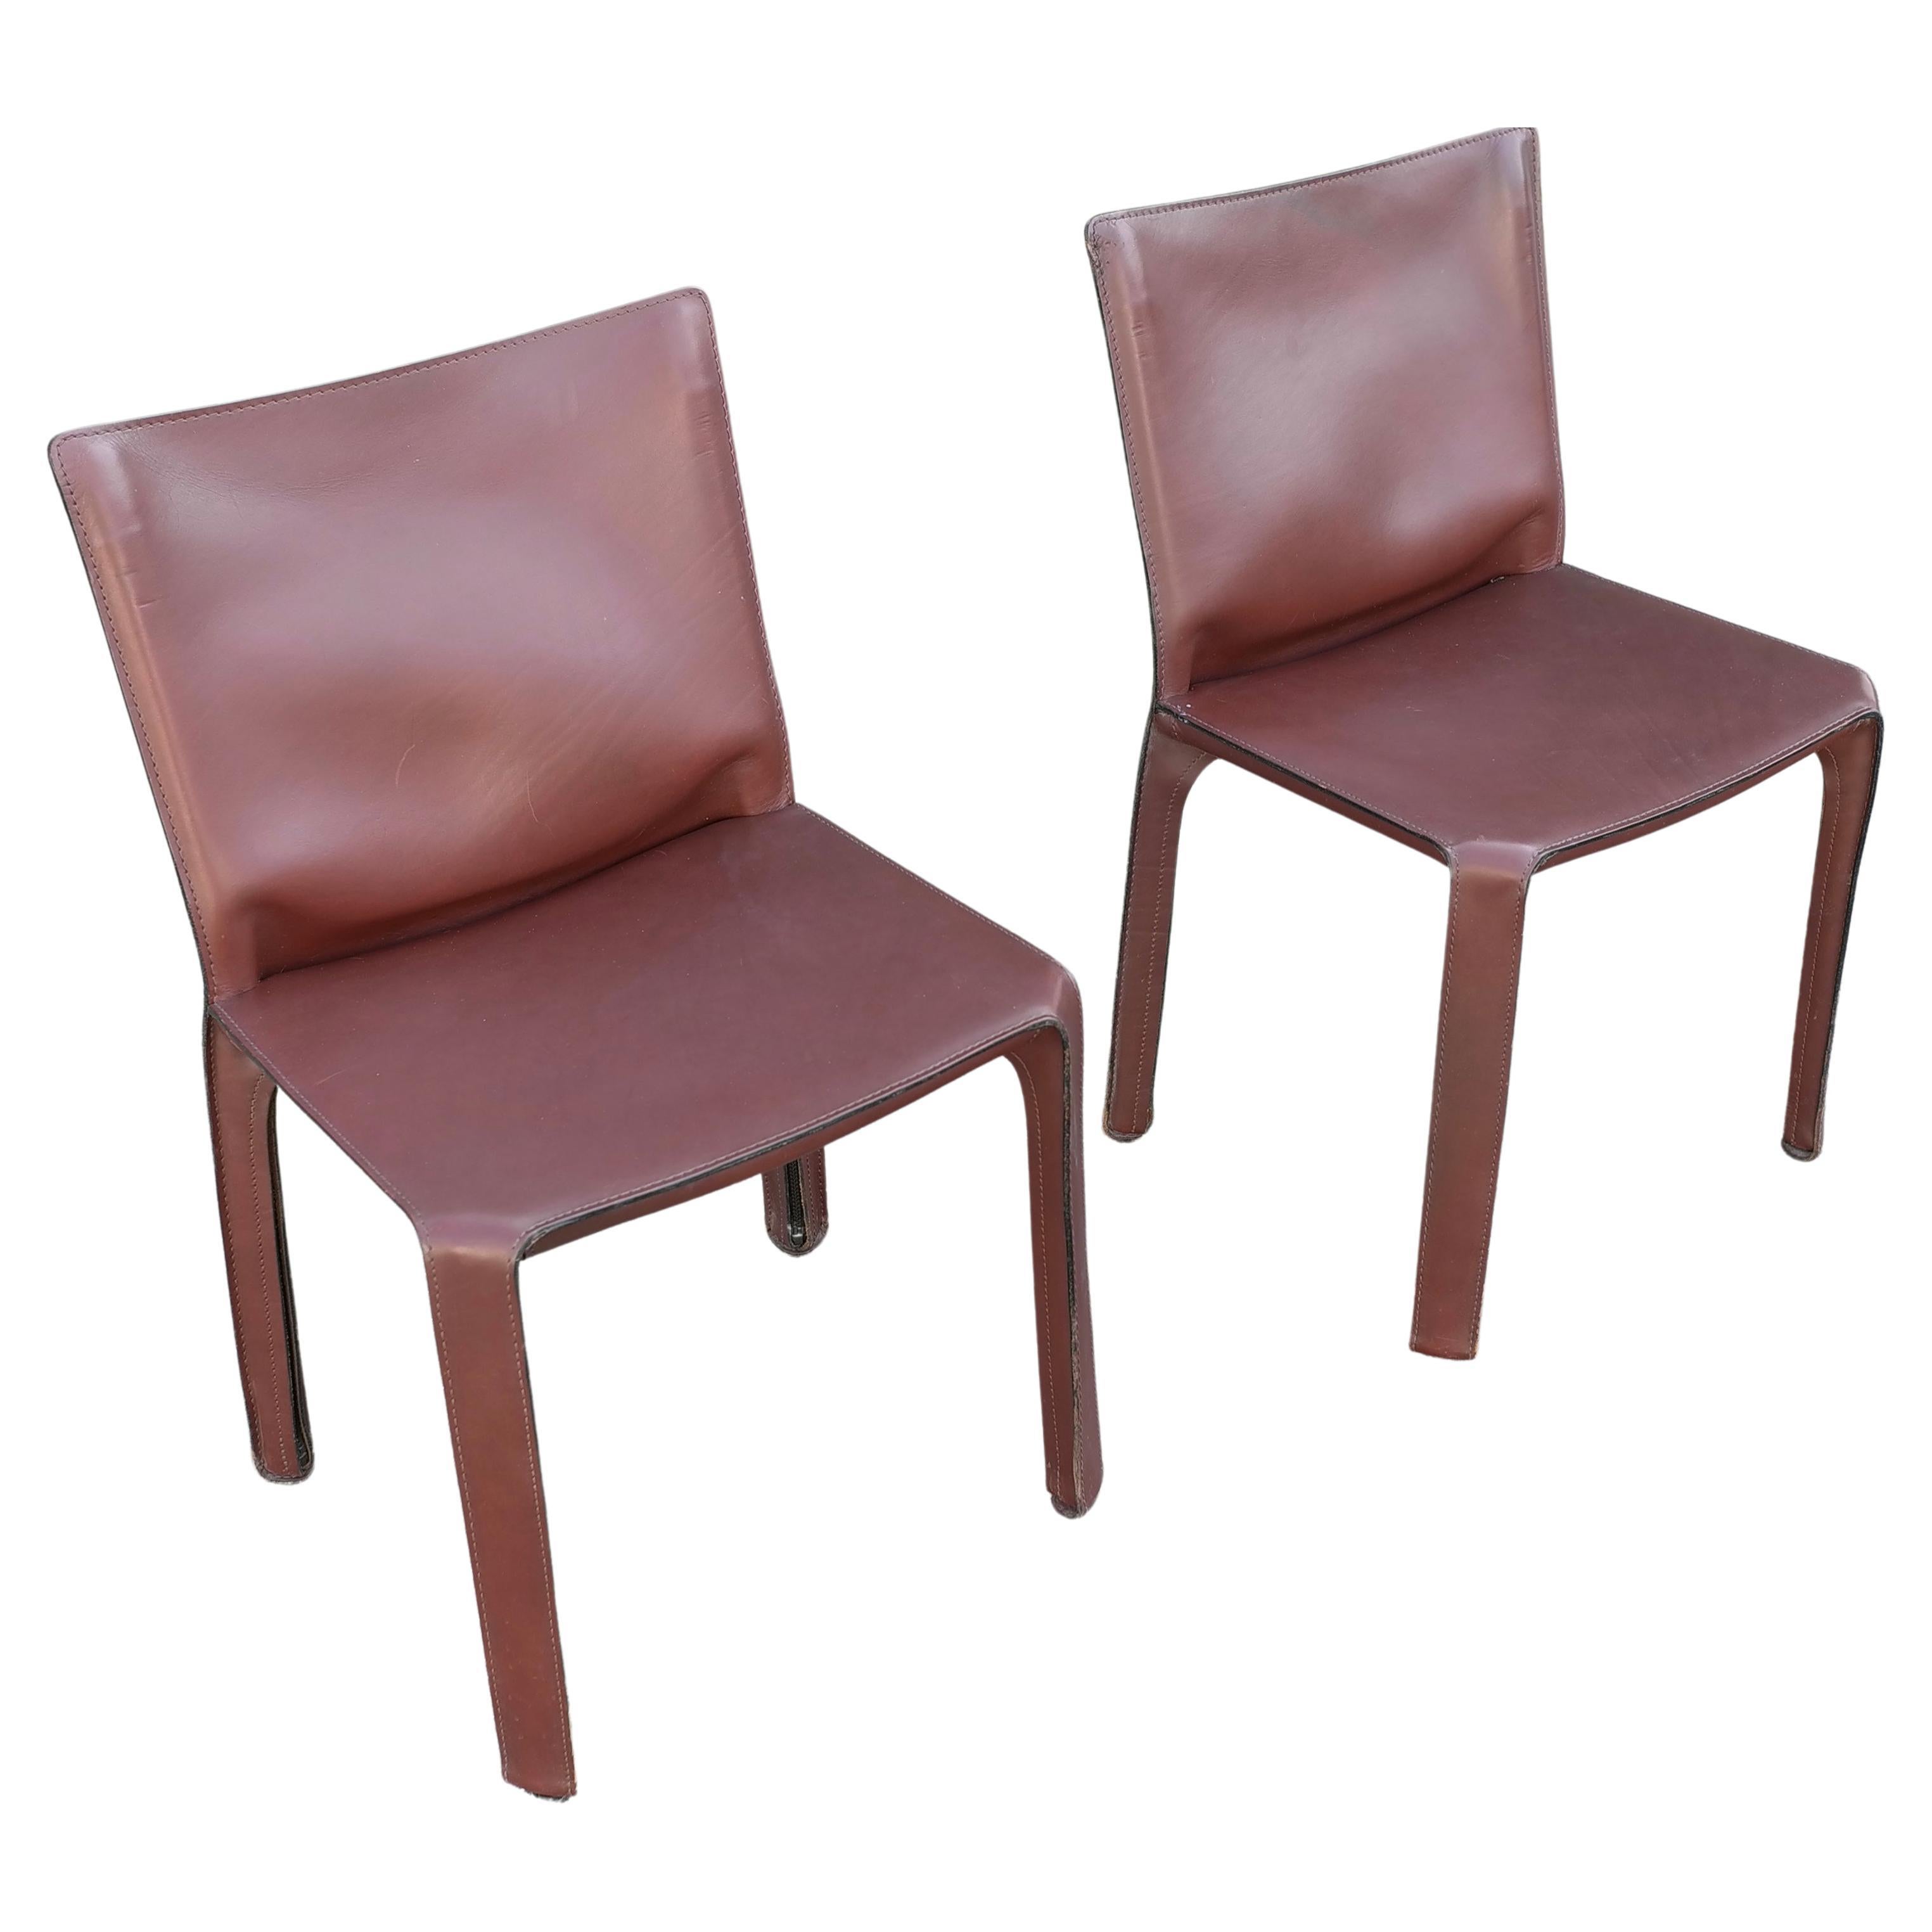 Leather Pair of Chestnut Colored Cab Dining Chairs by Mario Bellini for Cassina For Sale